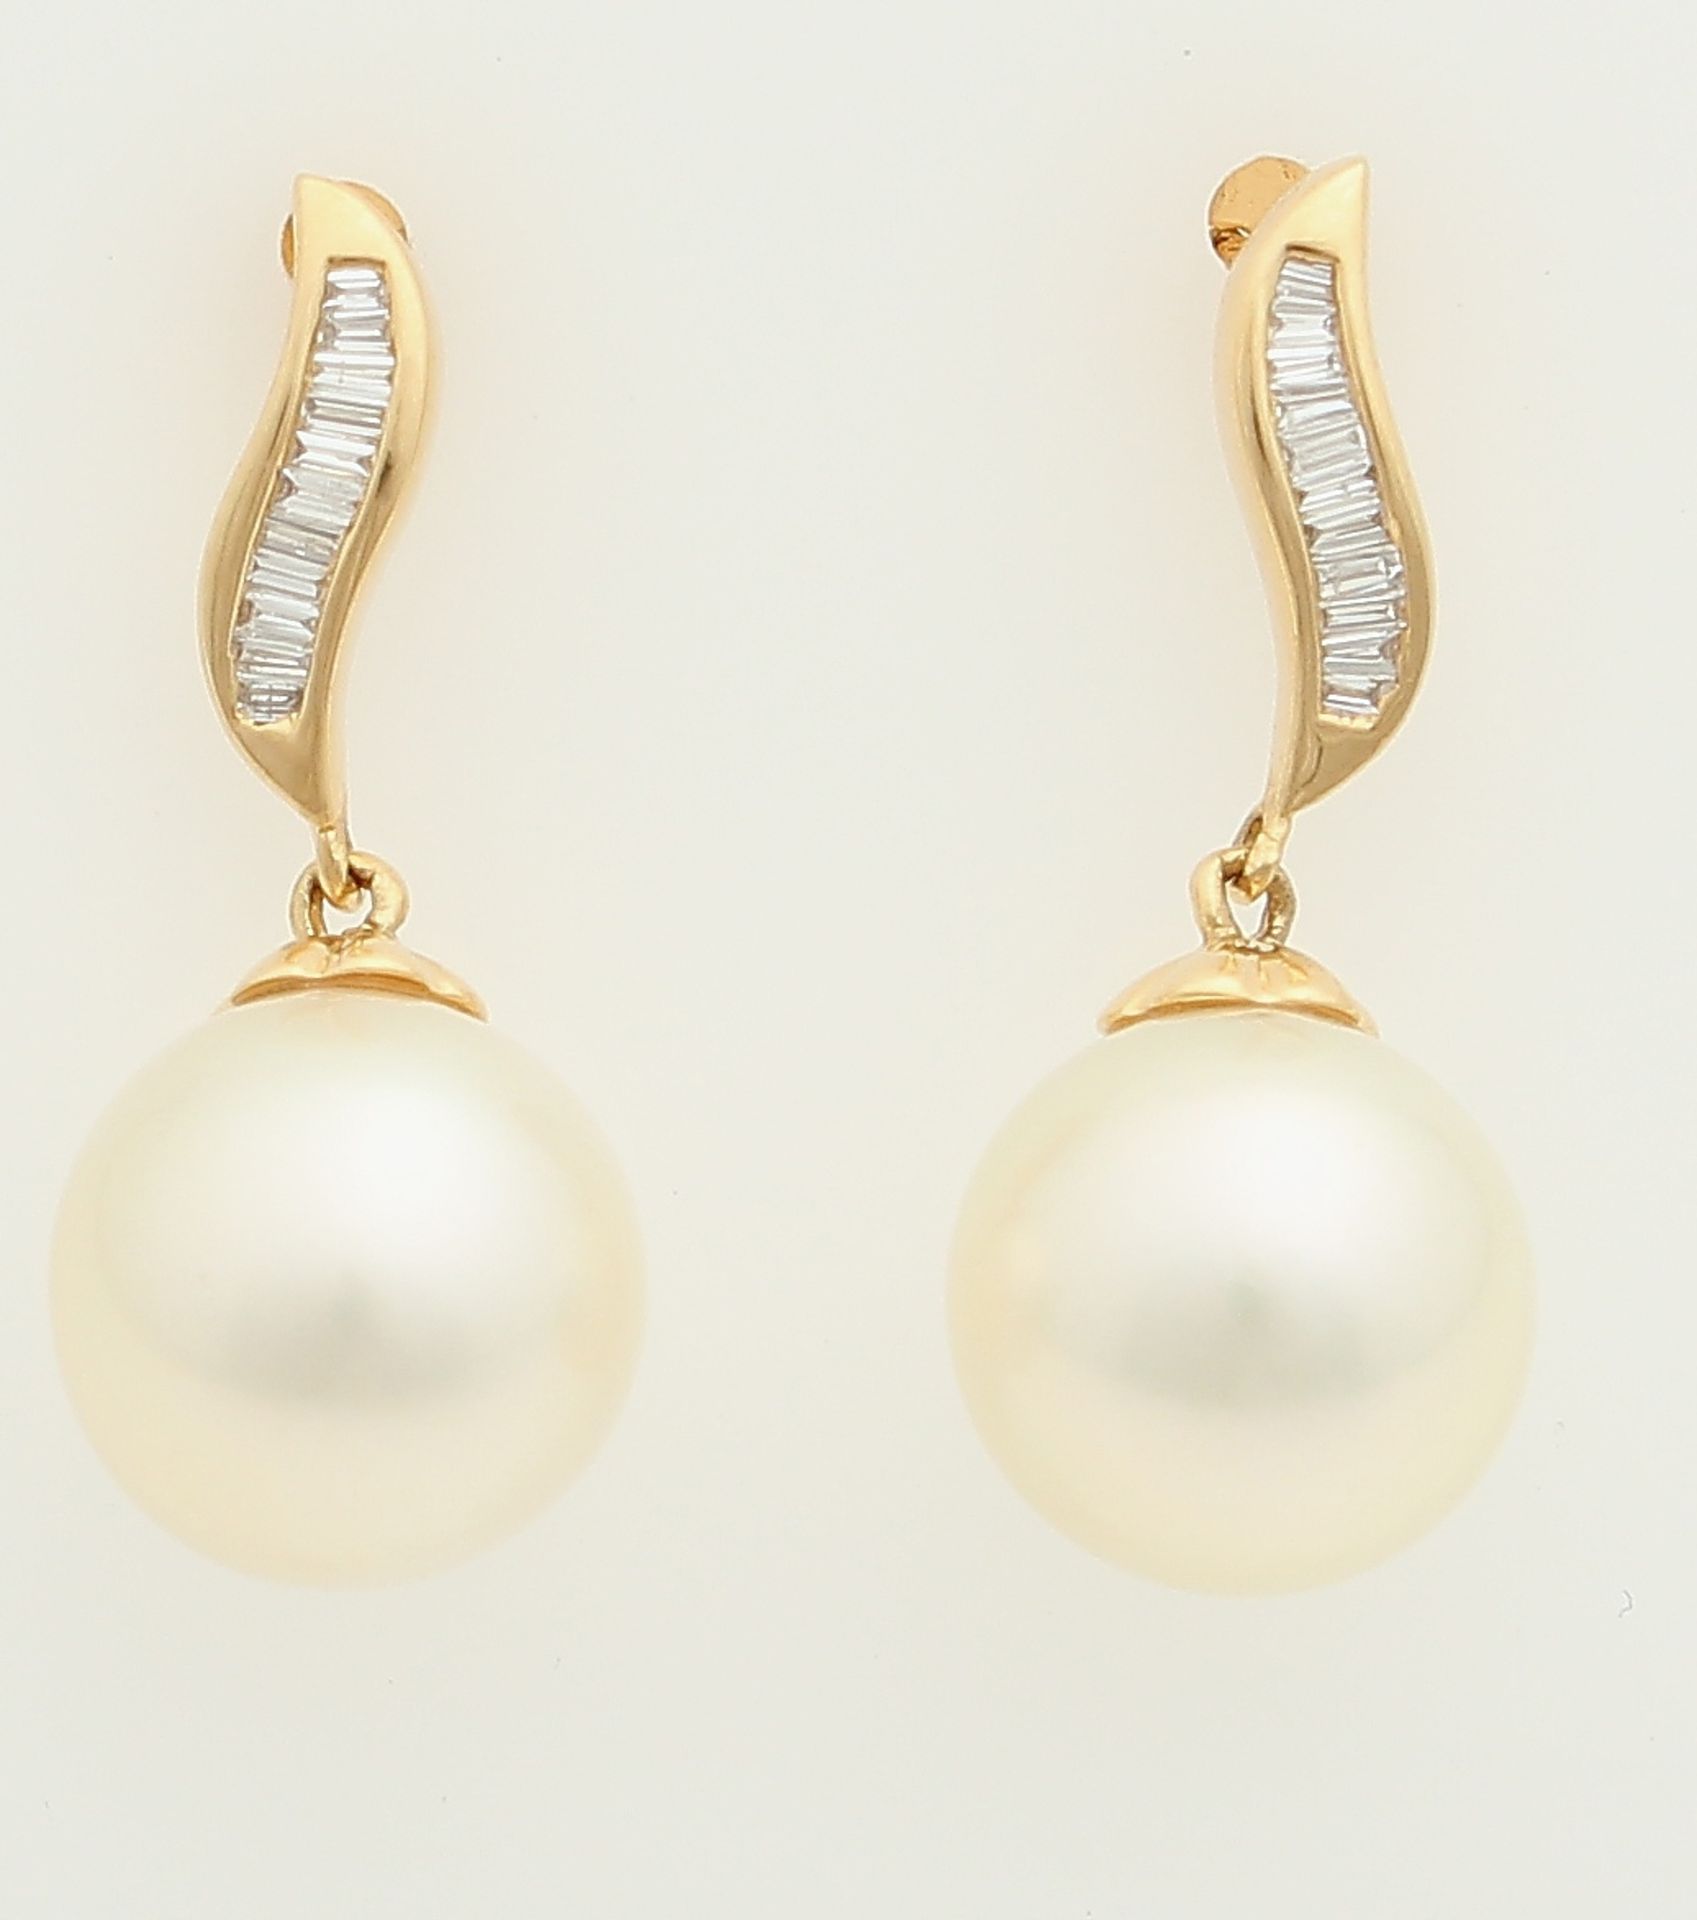 Gold earrings, with 750/000 and Brilliant Pearl. Earrings feature a battle containing 21 Baquette